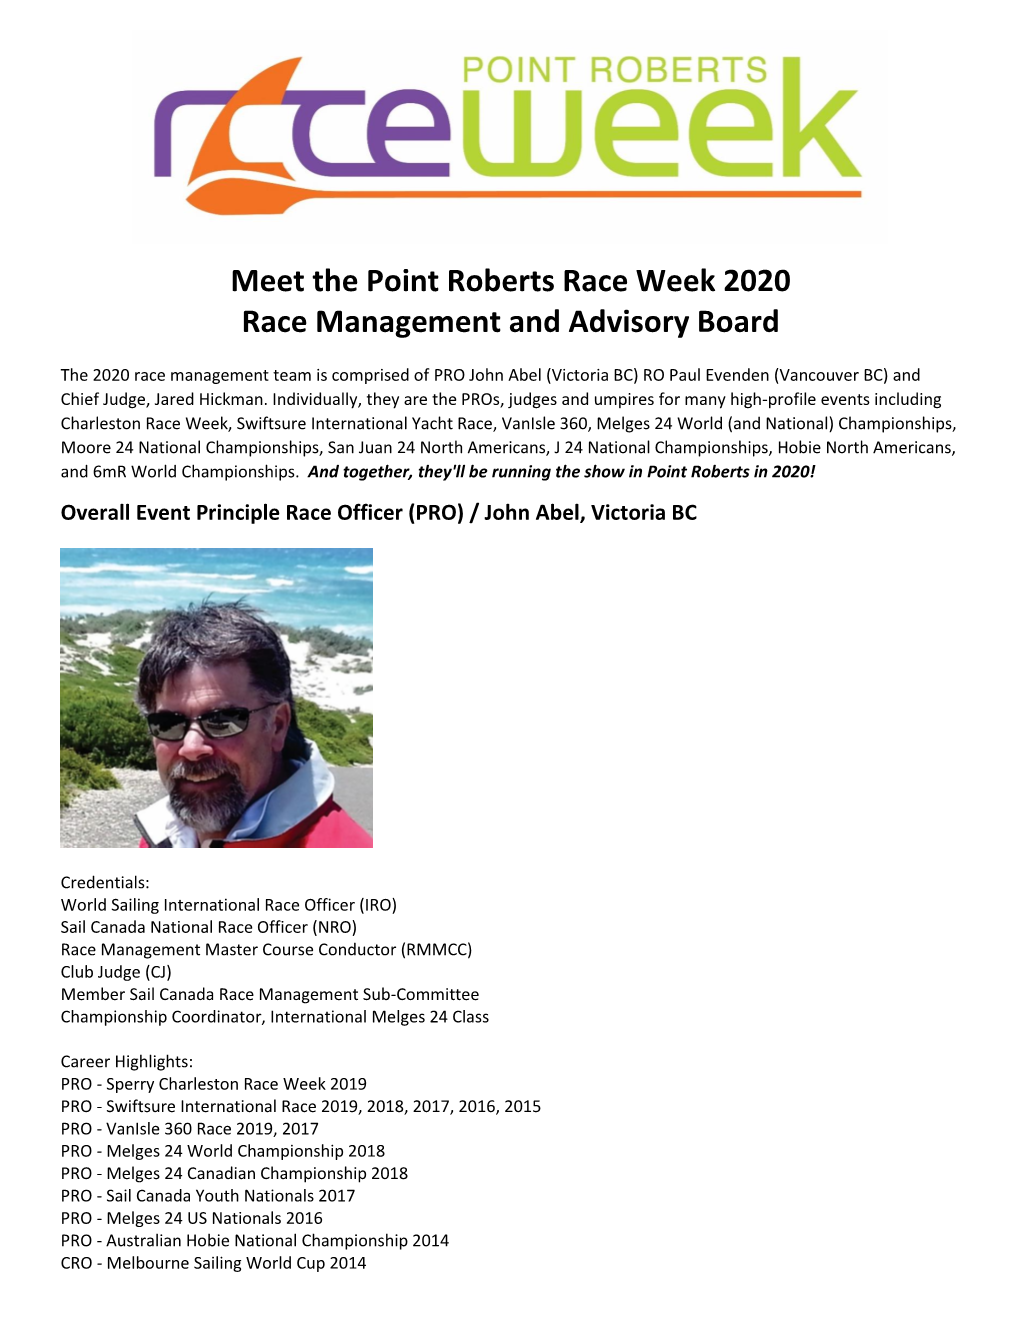 Meet the Point Roberts Race Week 2020 Race Management and Advisory Board